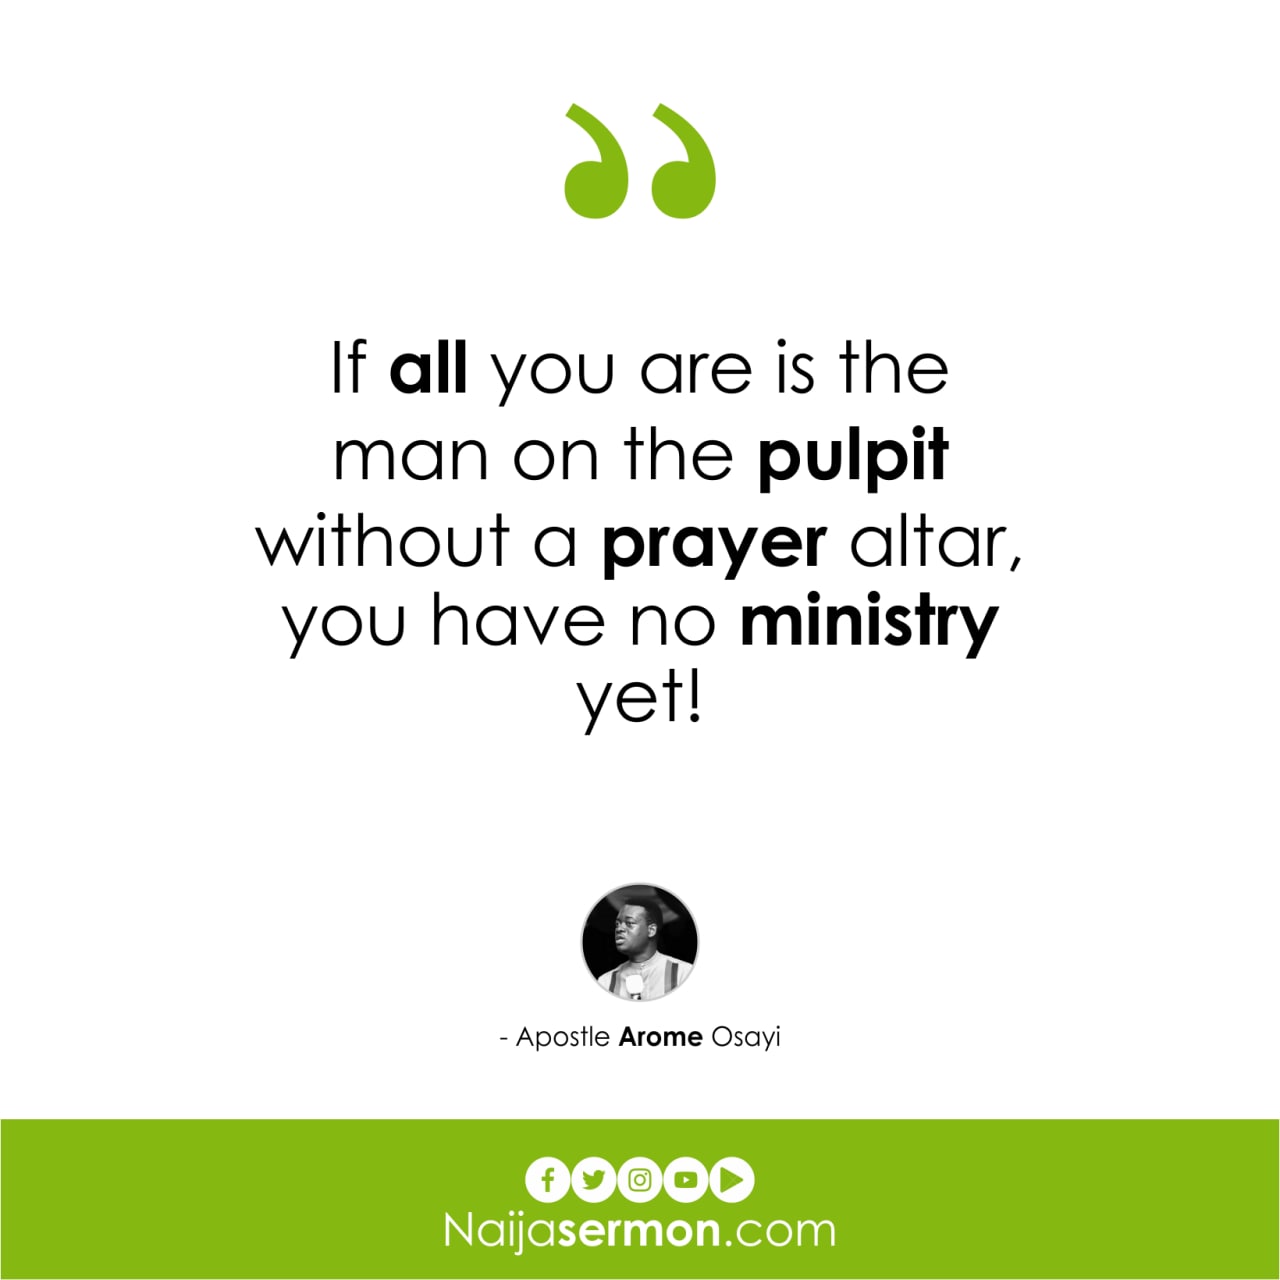 QUOTE OF THE DAY BY APOSTLE AROME OSAYI 19